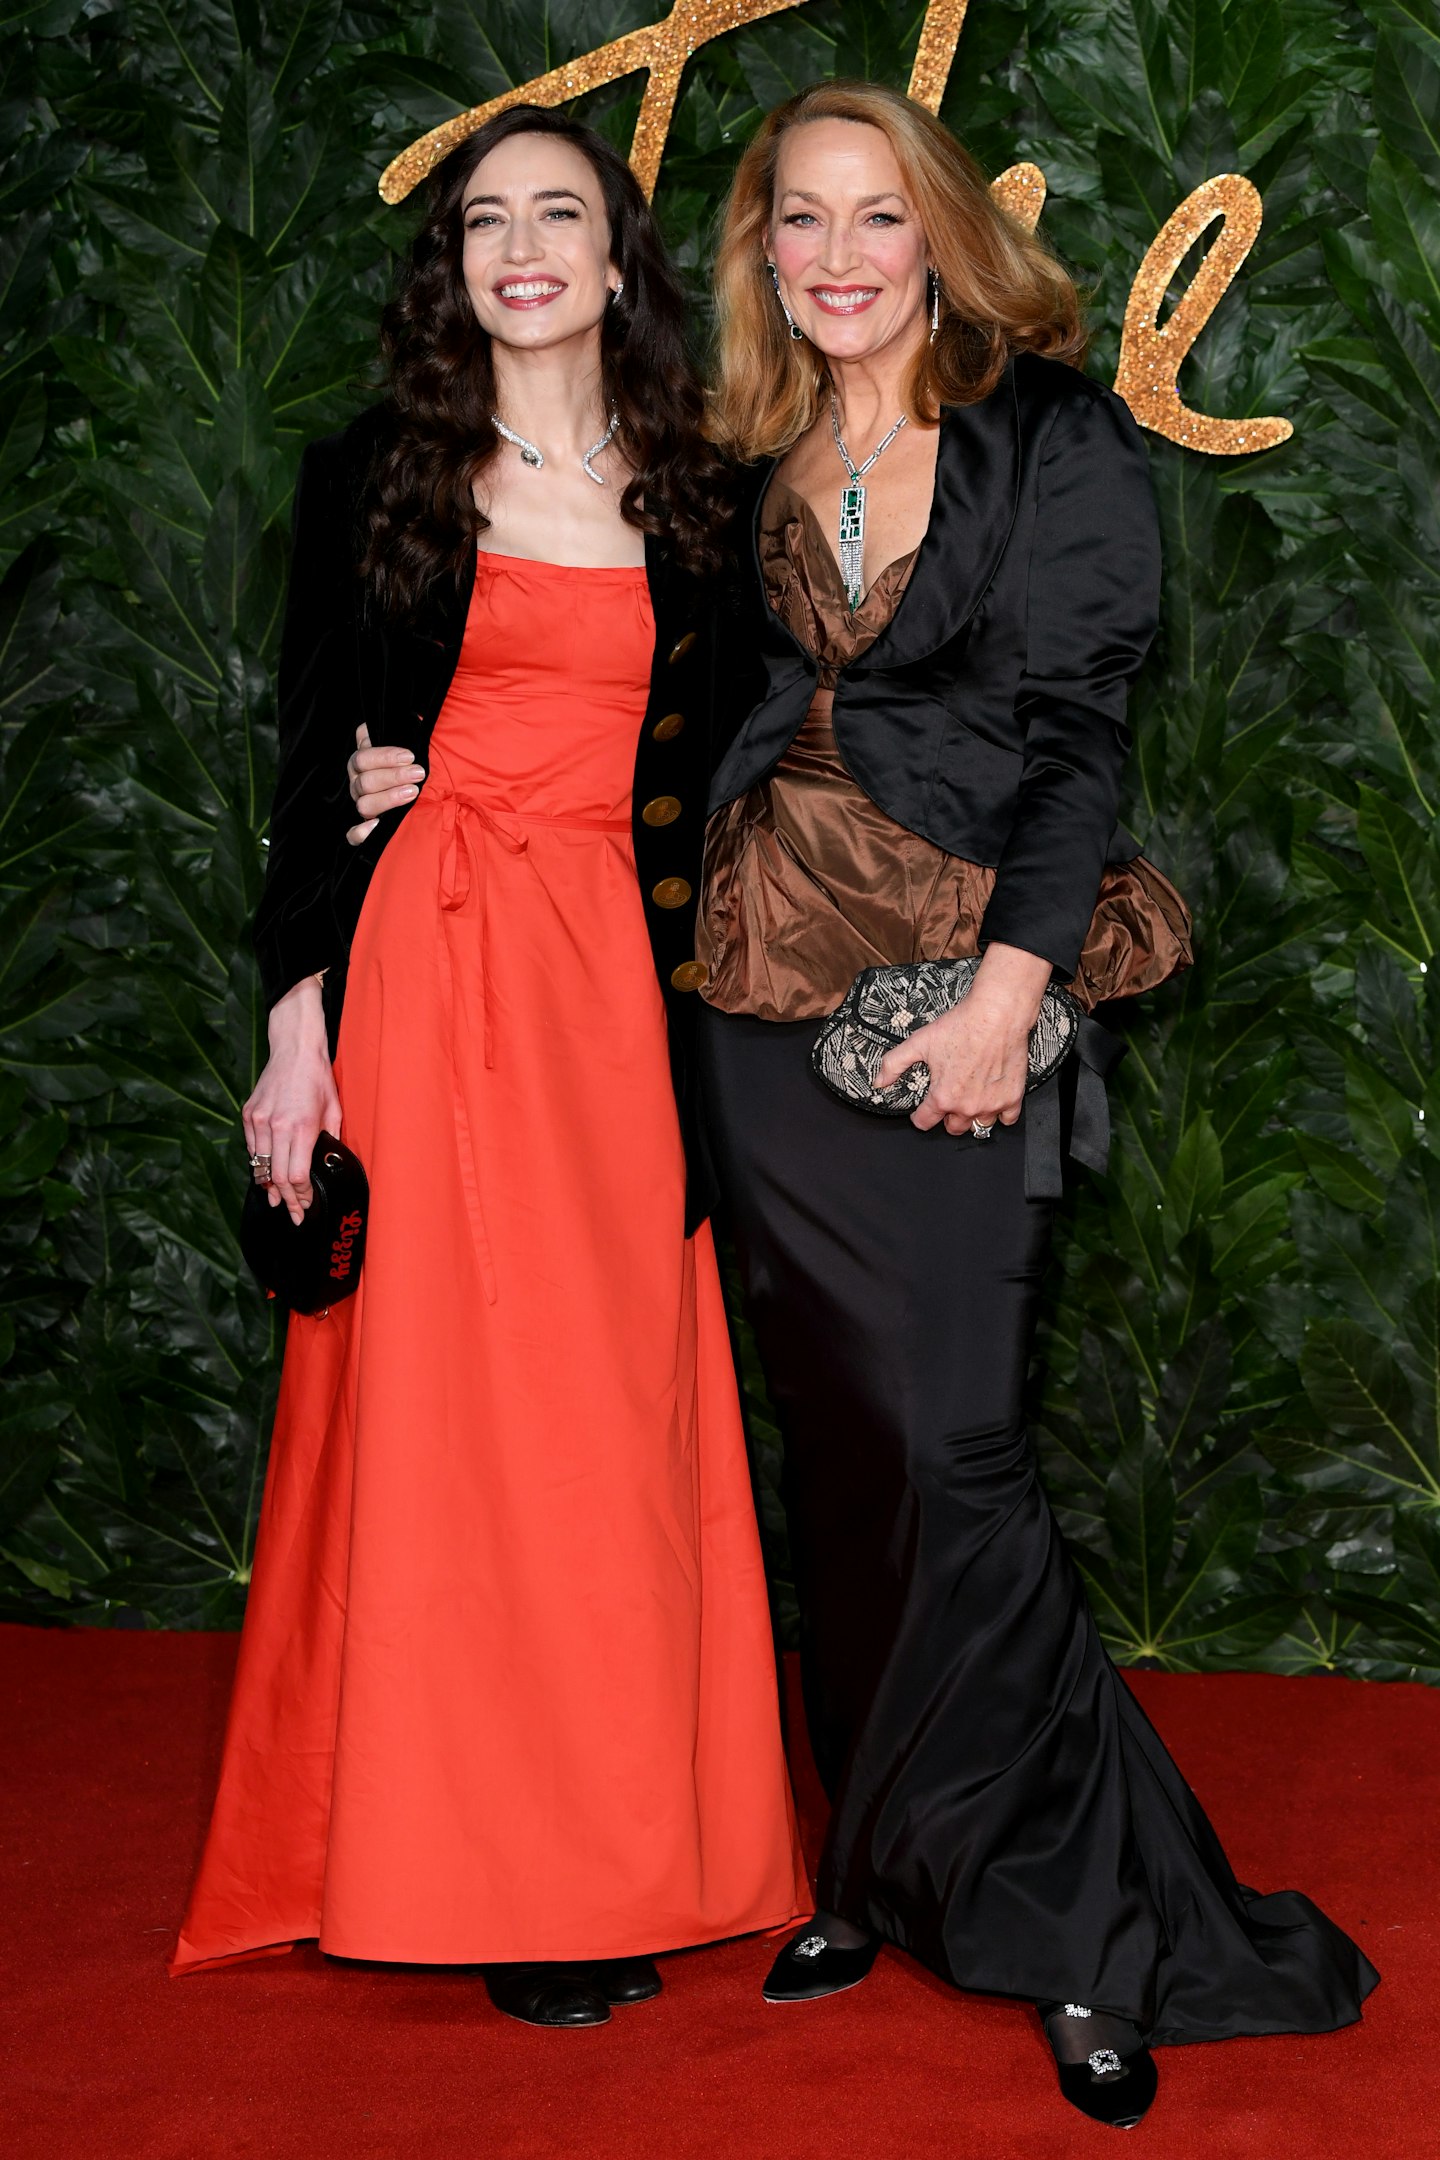 Lizzy Jagger and Jerry Hall at The Fashion Awards 2018